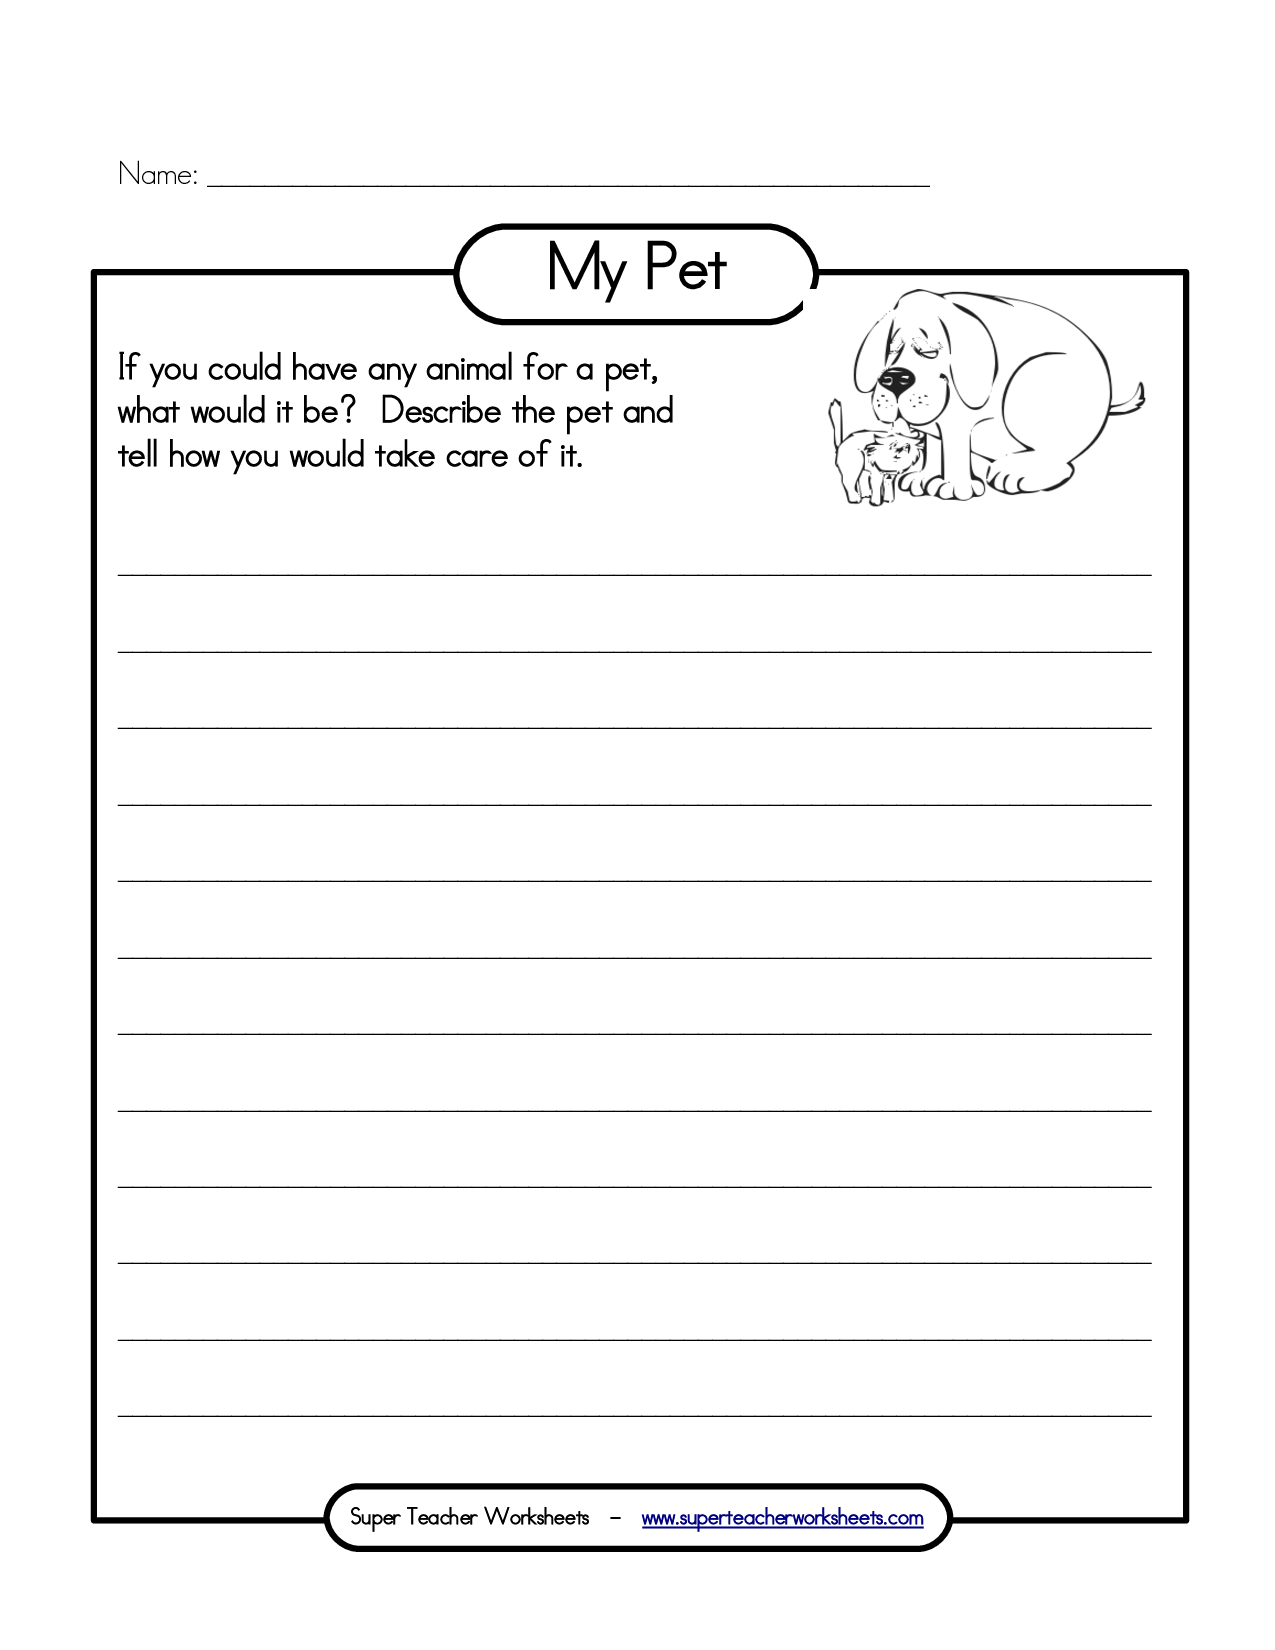 14-best-images-of-my-pet-worksheet-all-about-my-pet-worksheet-my